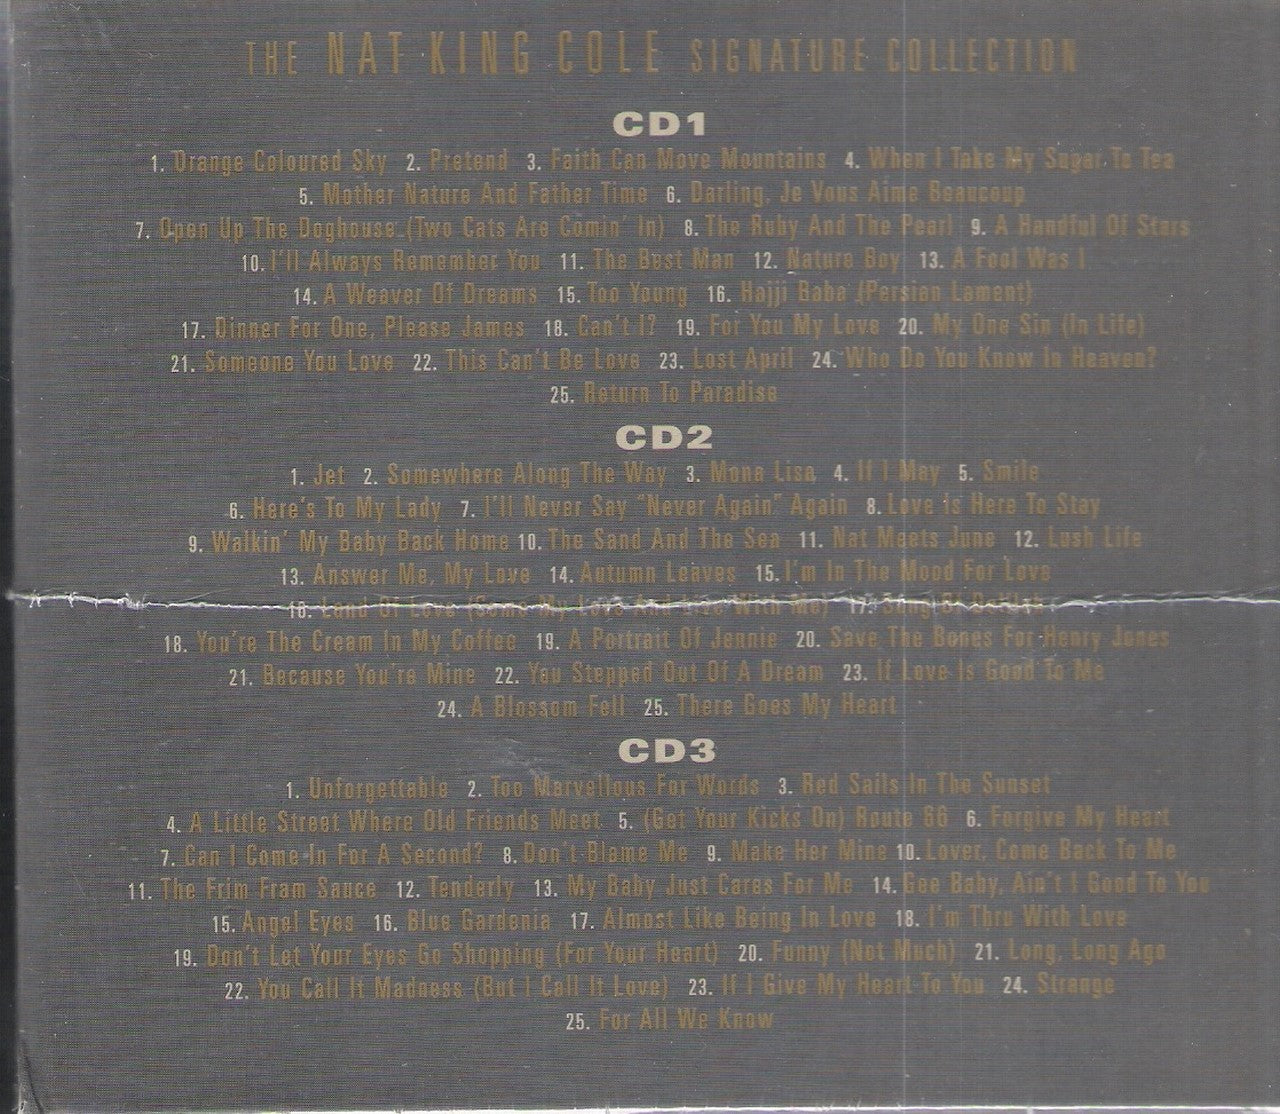 CD-3 - Nat King Cole - Deluxe Edition